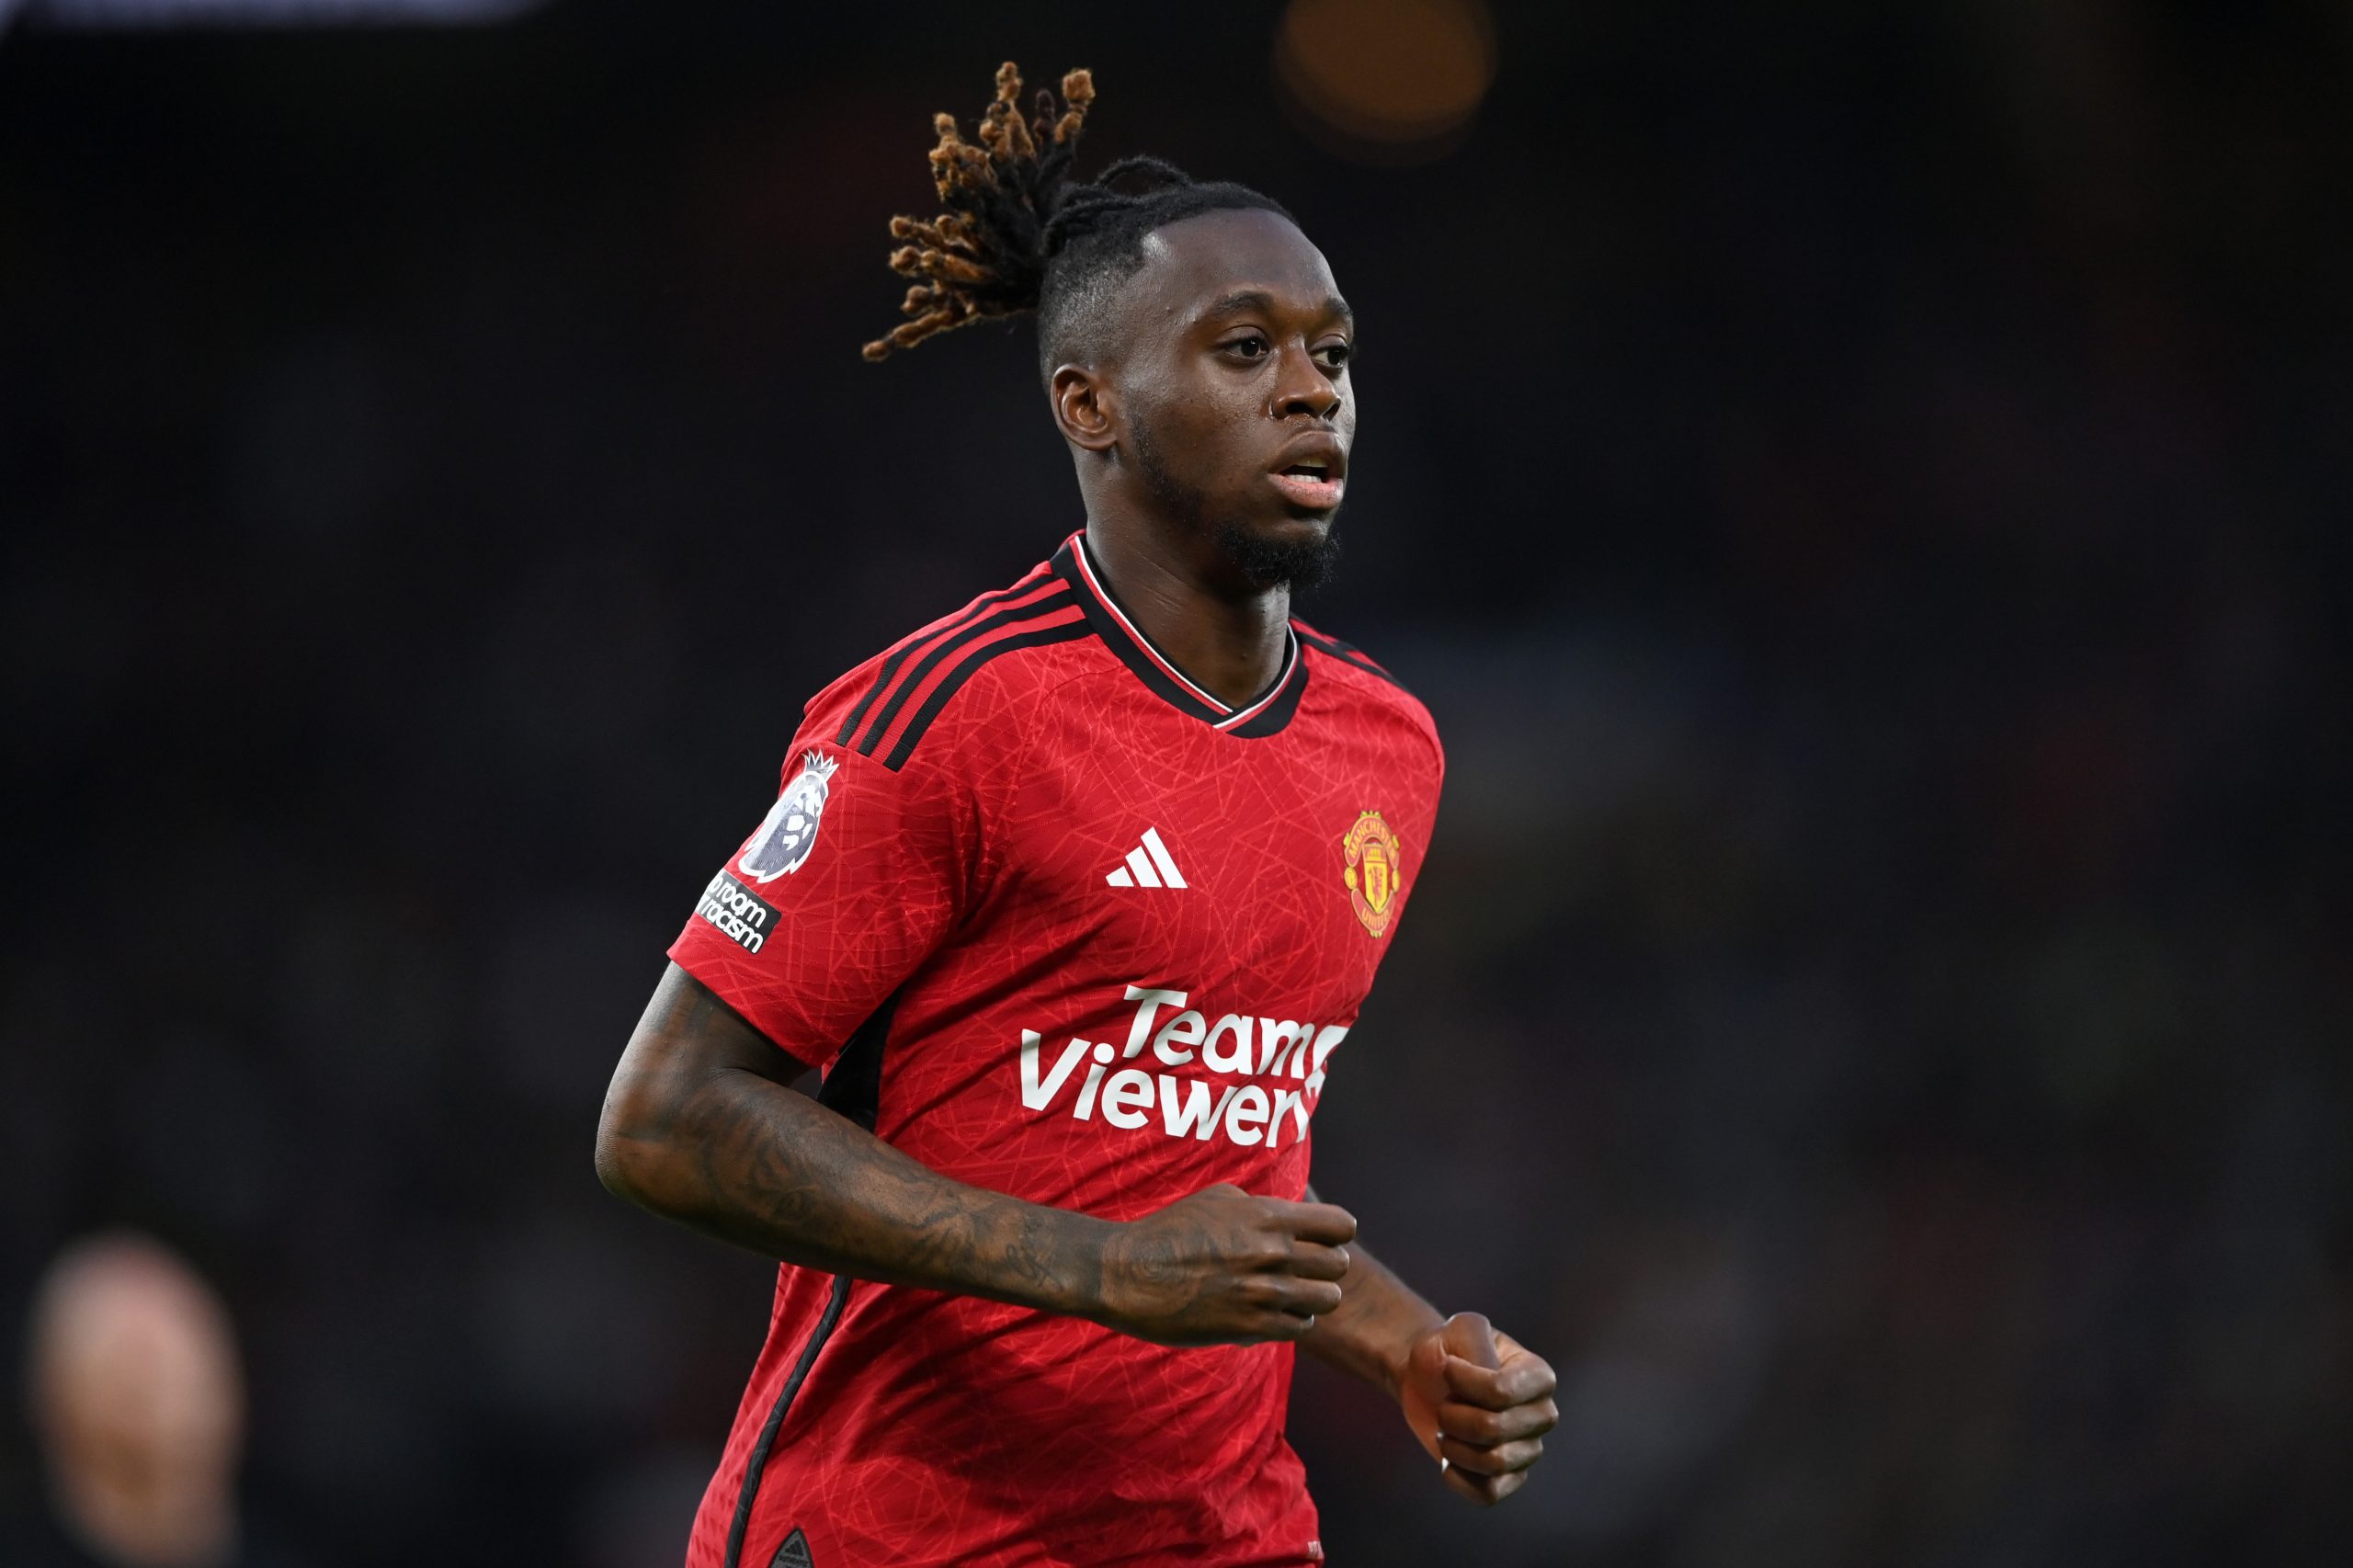 Manchester United likely to welcome back Luke Shaw and Aaron Wan-Bissaka after the November international break.